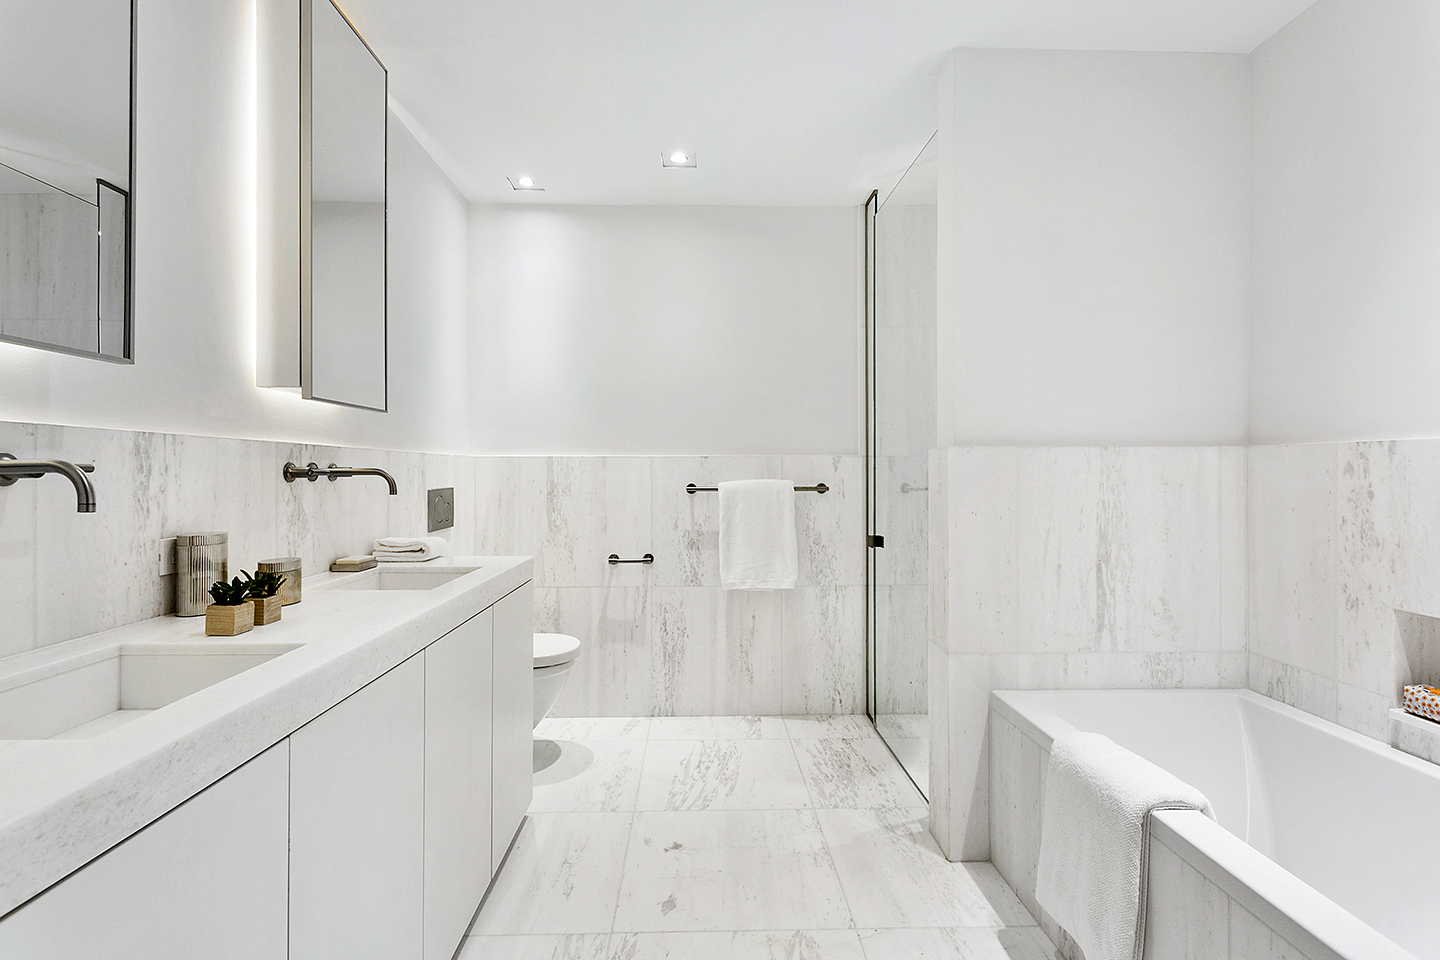 Finely honed marble countertops and wall cladding in the master bathroom by Piet Boon